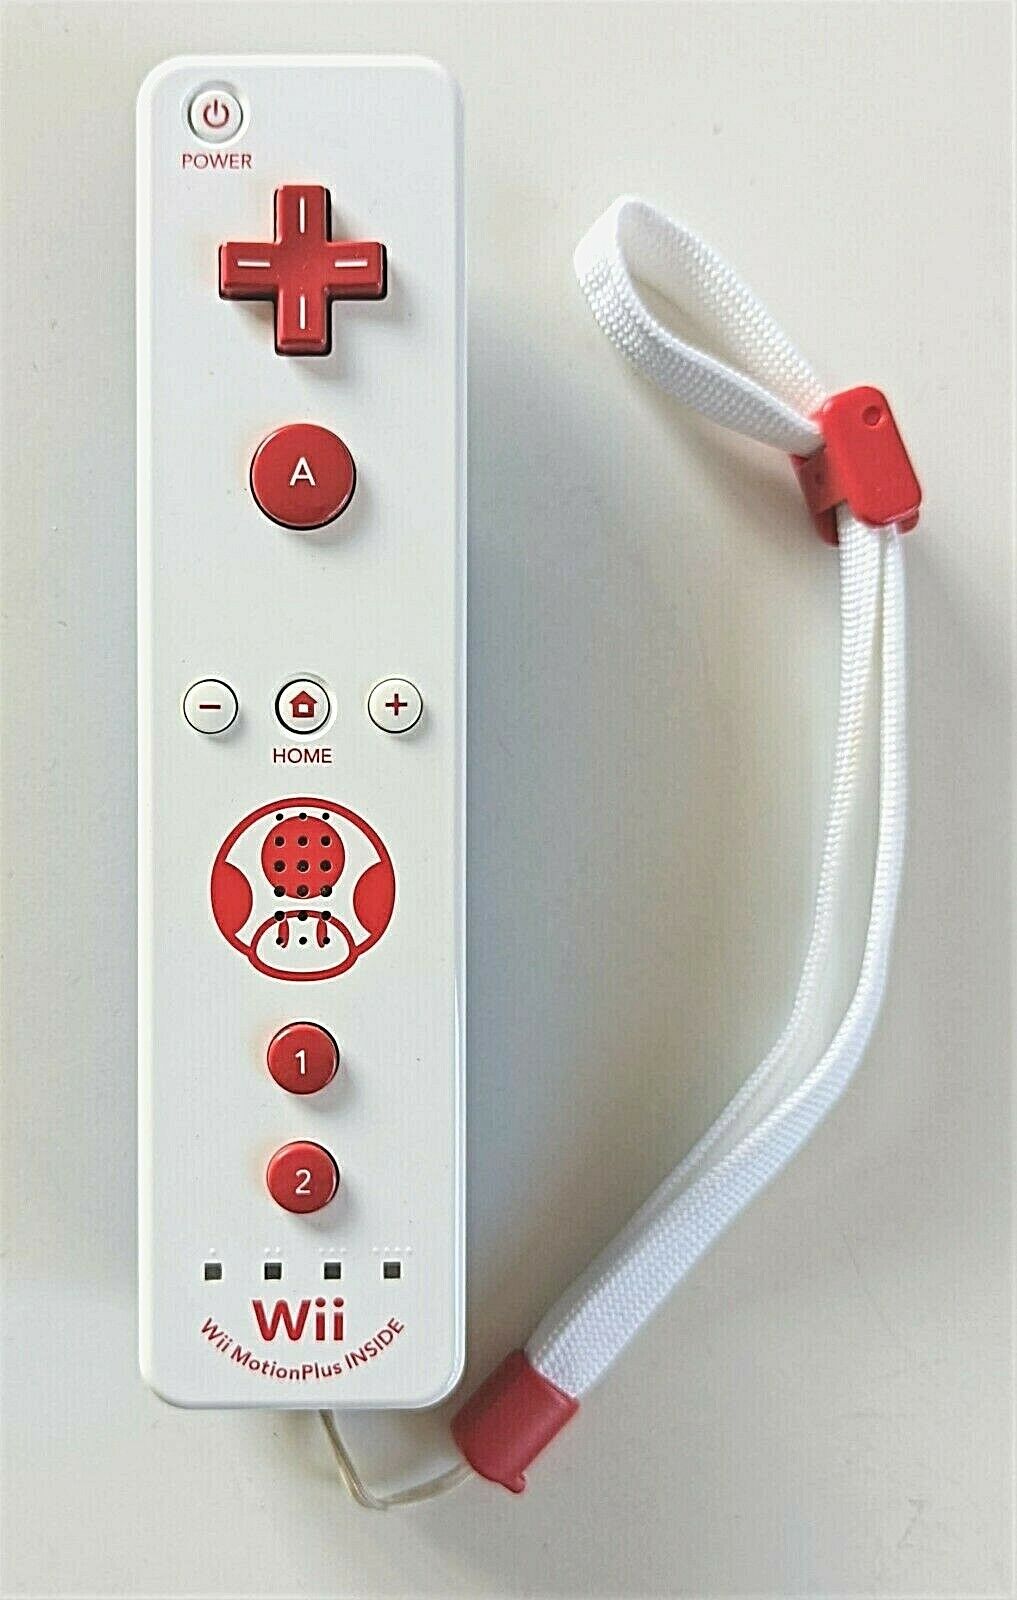 Nintendo Wii Remote Plus Toad specifications